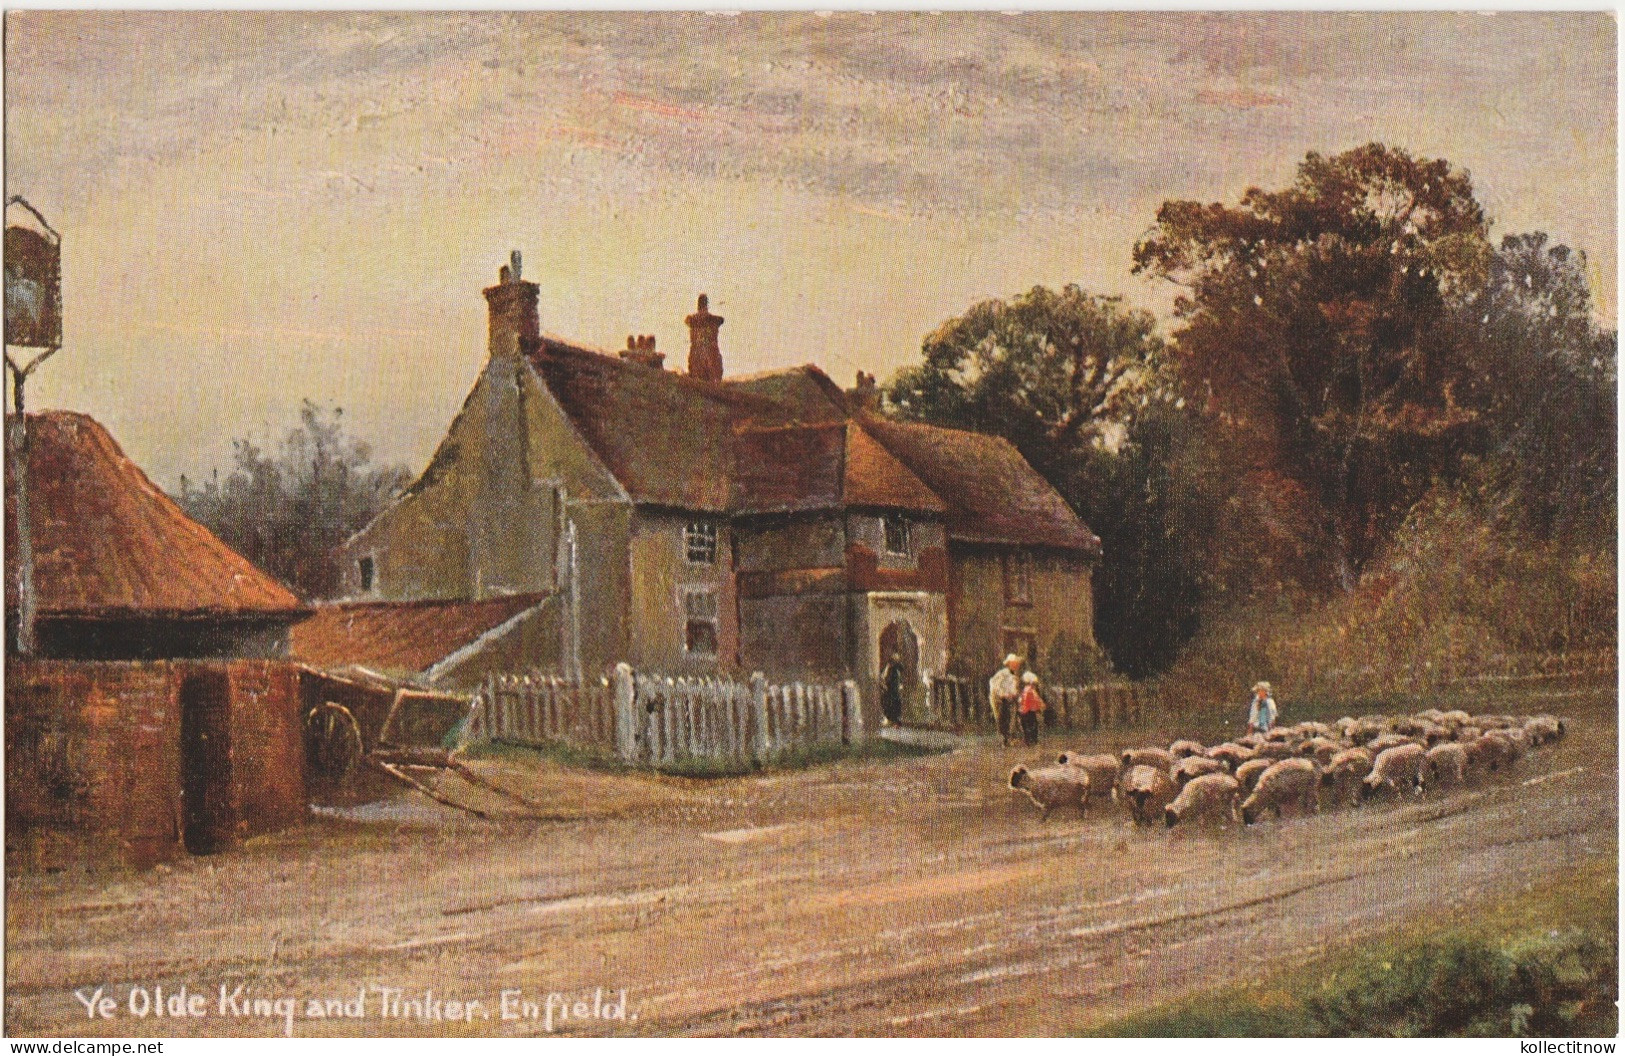 YE OLDE KING AND TINKER - ENFIELD - Middlesex